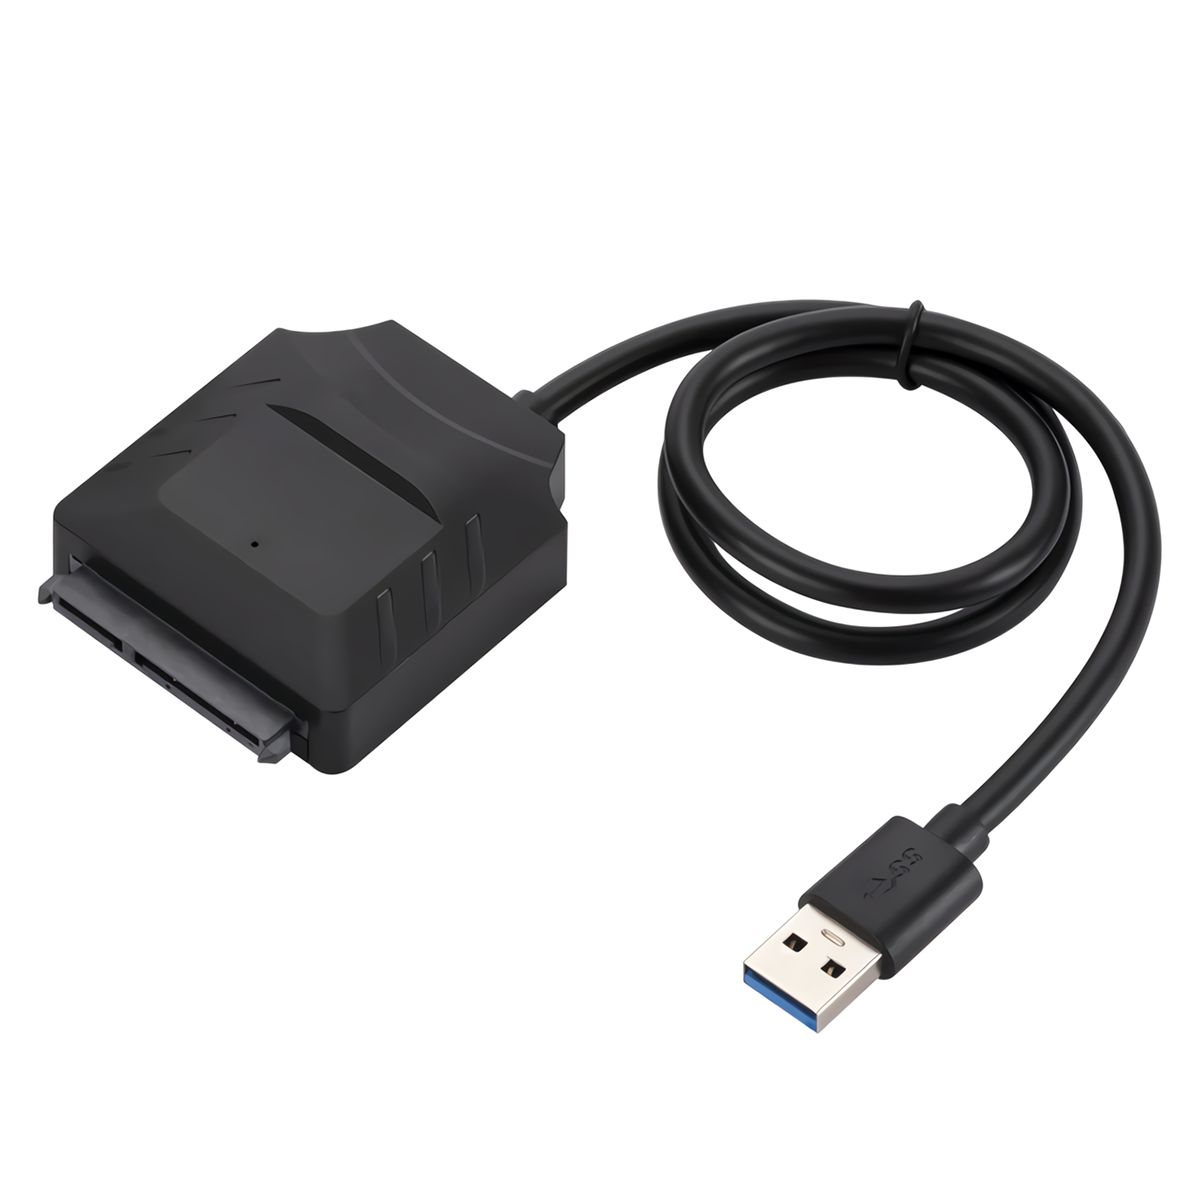 MnnWuu-SSD-HDD-USB-30-to-SATA-Converter-Cable-Hard-Drive-Converter-Adapter-Support-25--35quot-HDD-SS-1951620-1